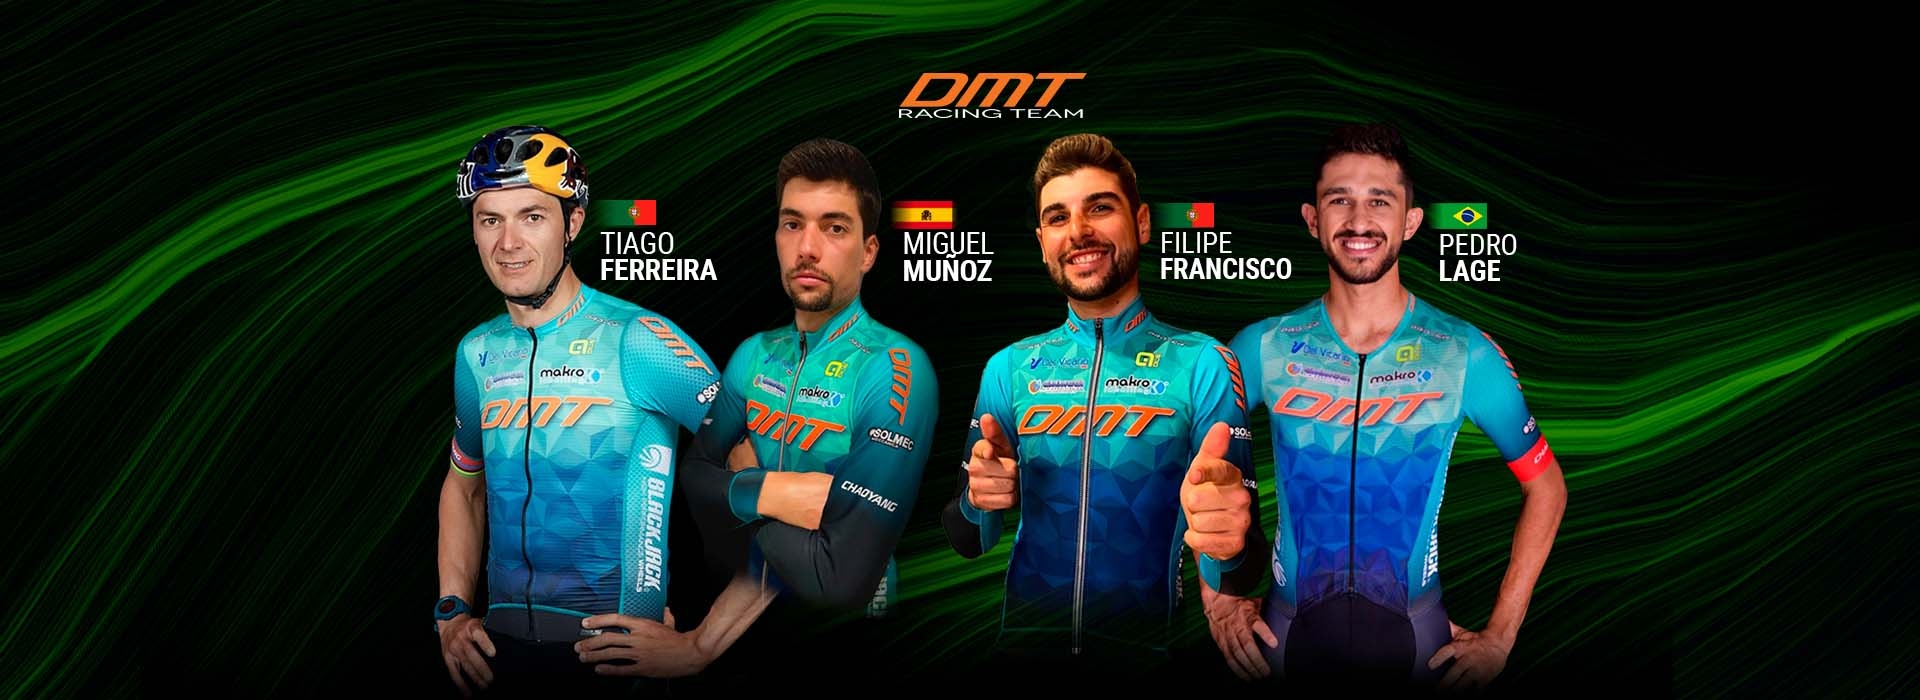 A renewed DMT RACING TEAM is back with a vengeance in its sights